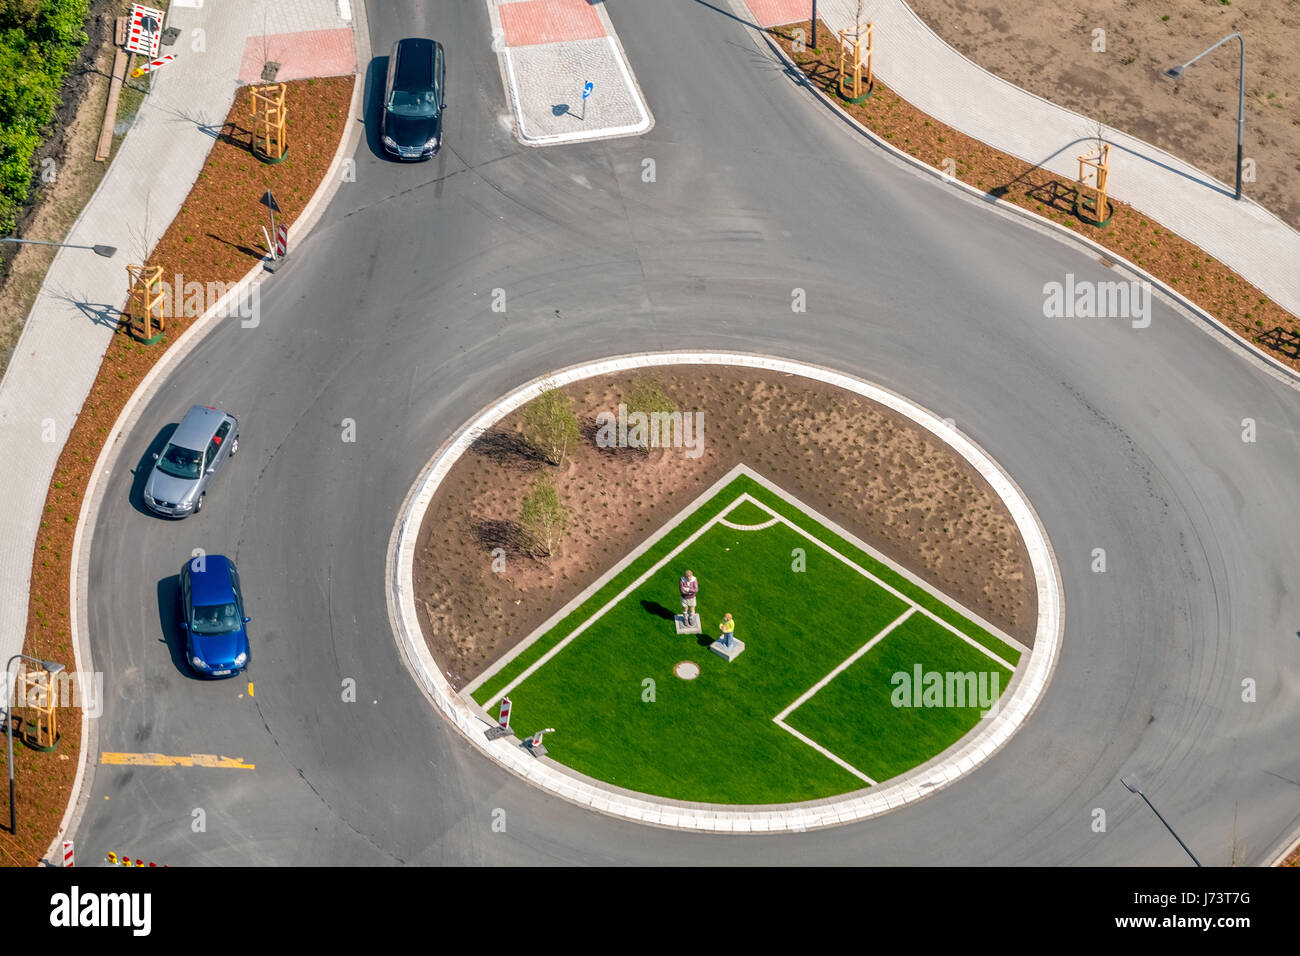 Hrubesch monument is located in the traffic island island in the Pelkumer roundabout, football legend Horst Hrubesch, Hamm, Ruhr area, North Rhine-Wes Stock Photo